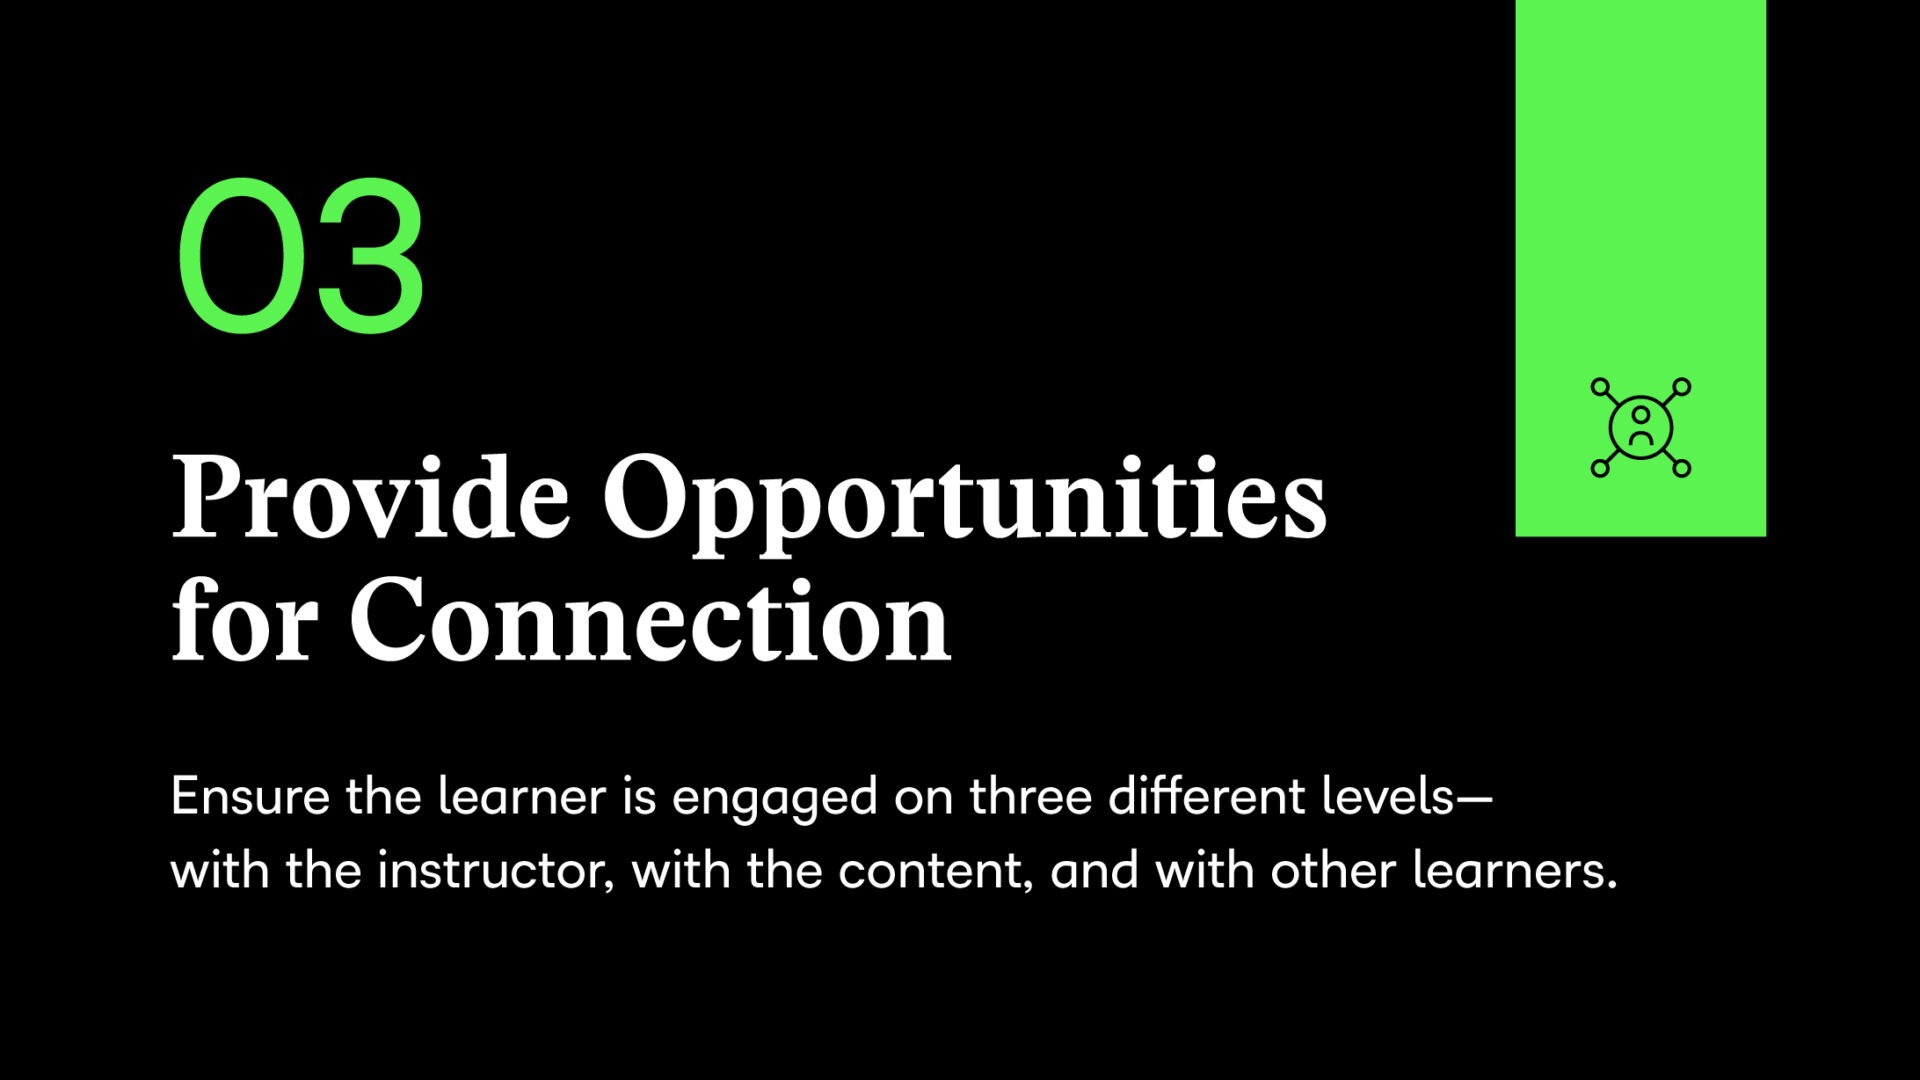 Provide opportunities for connection